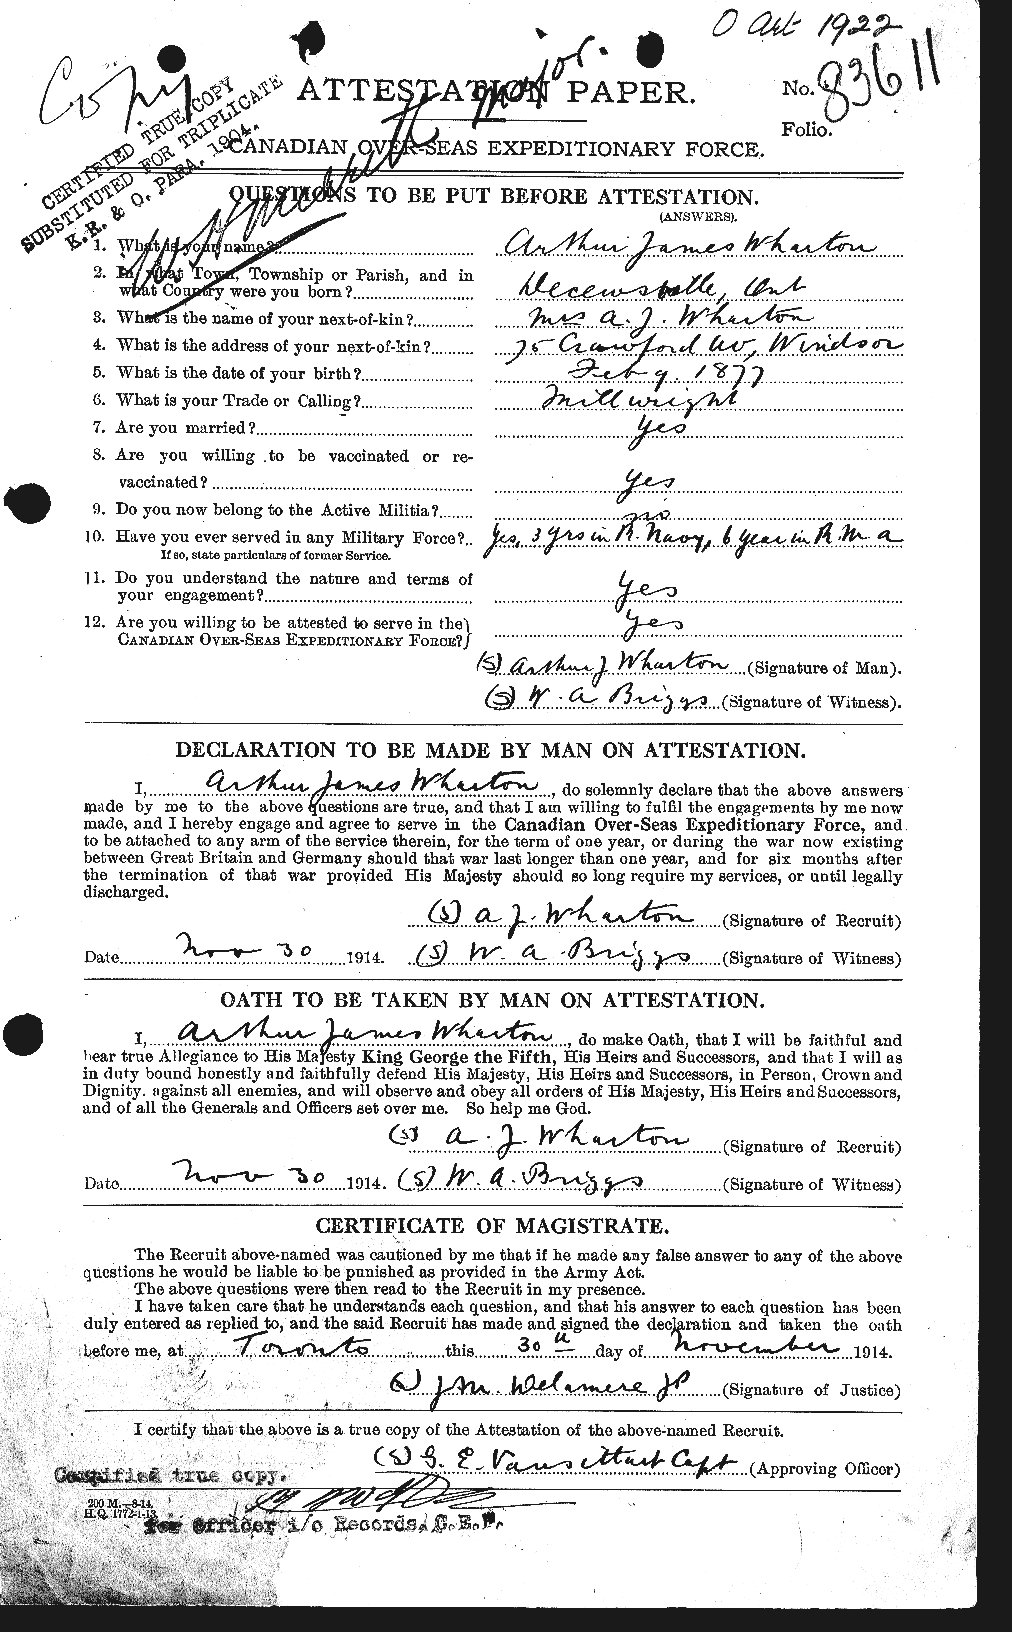 Personnel Records of the First World War - CEF 668219a